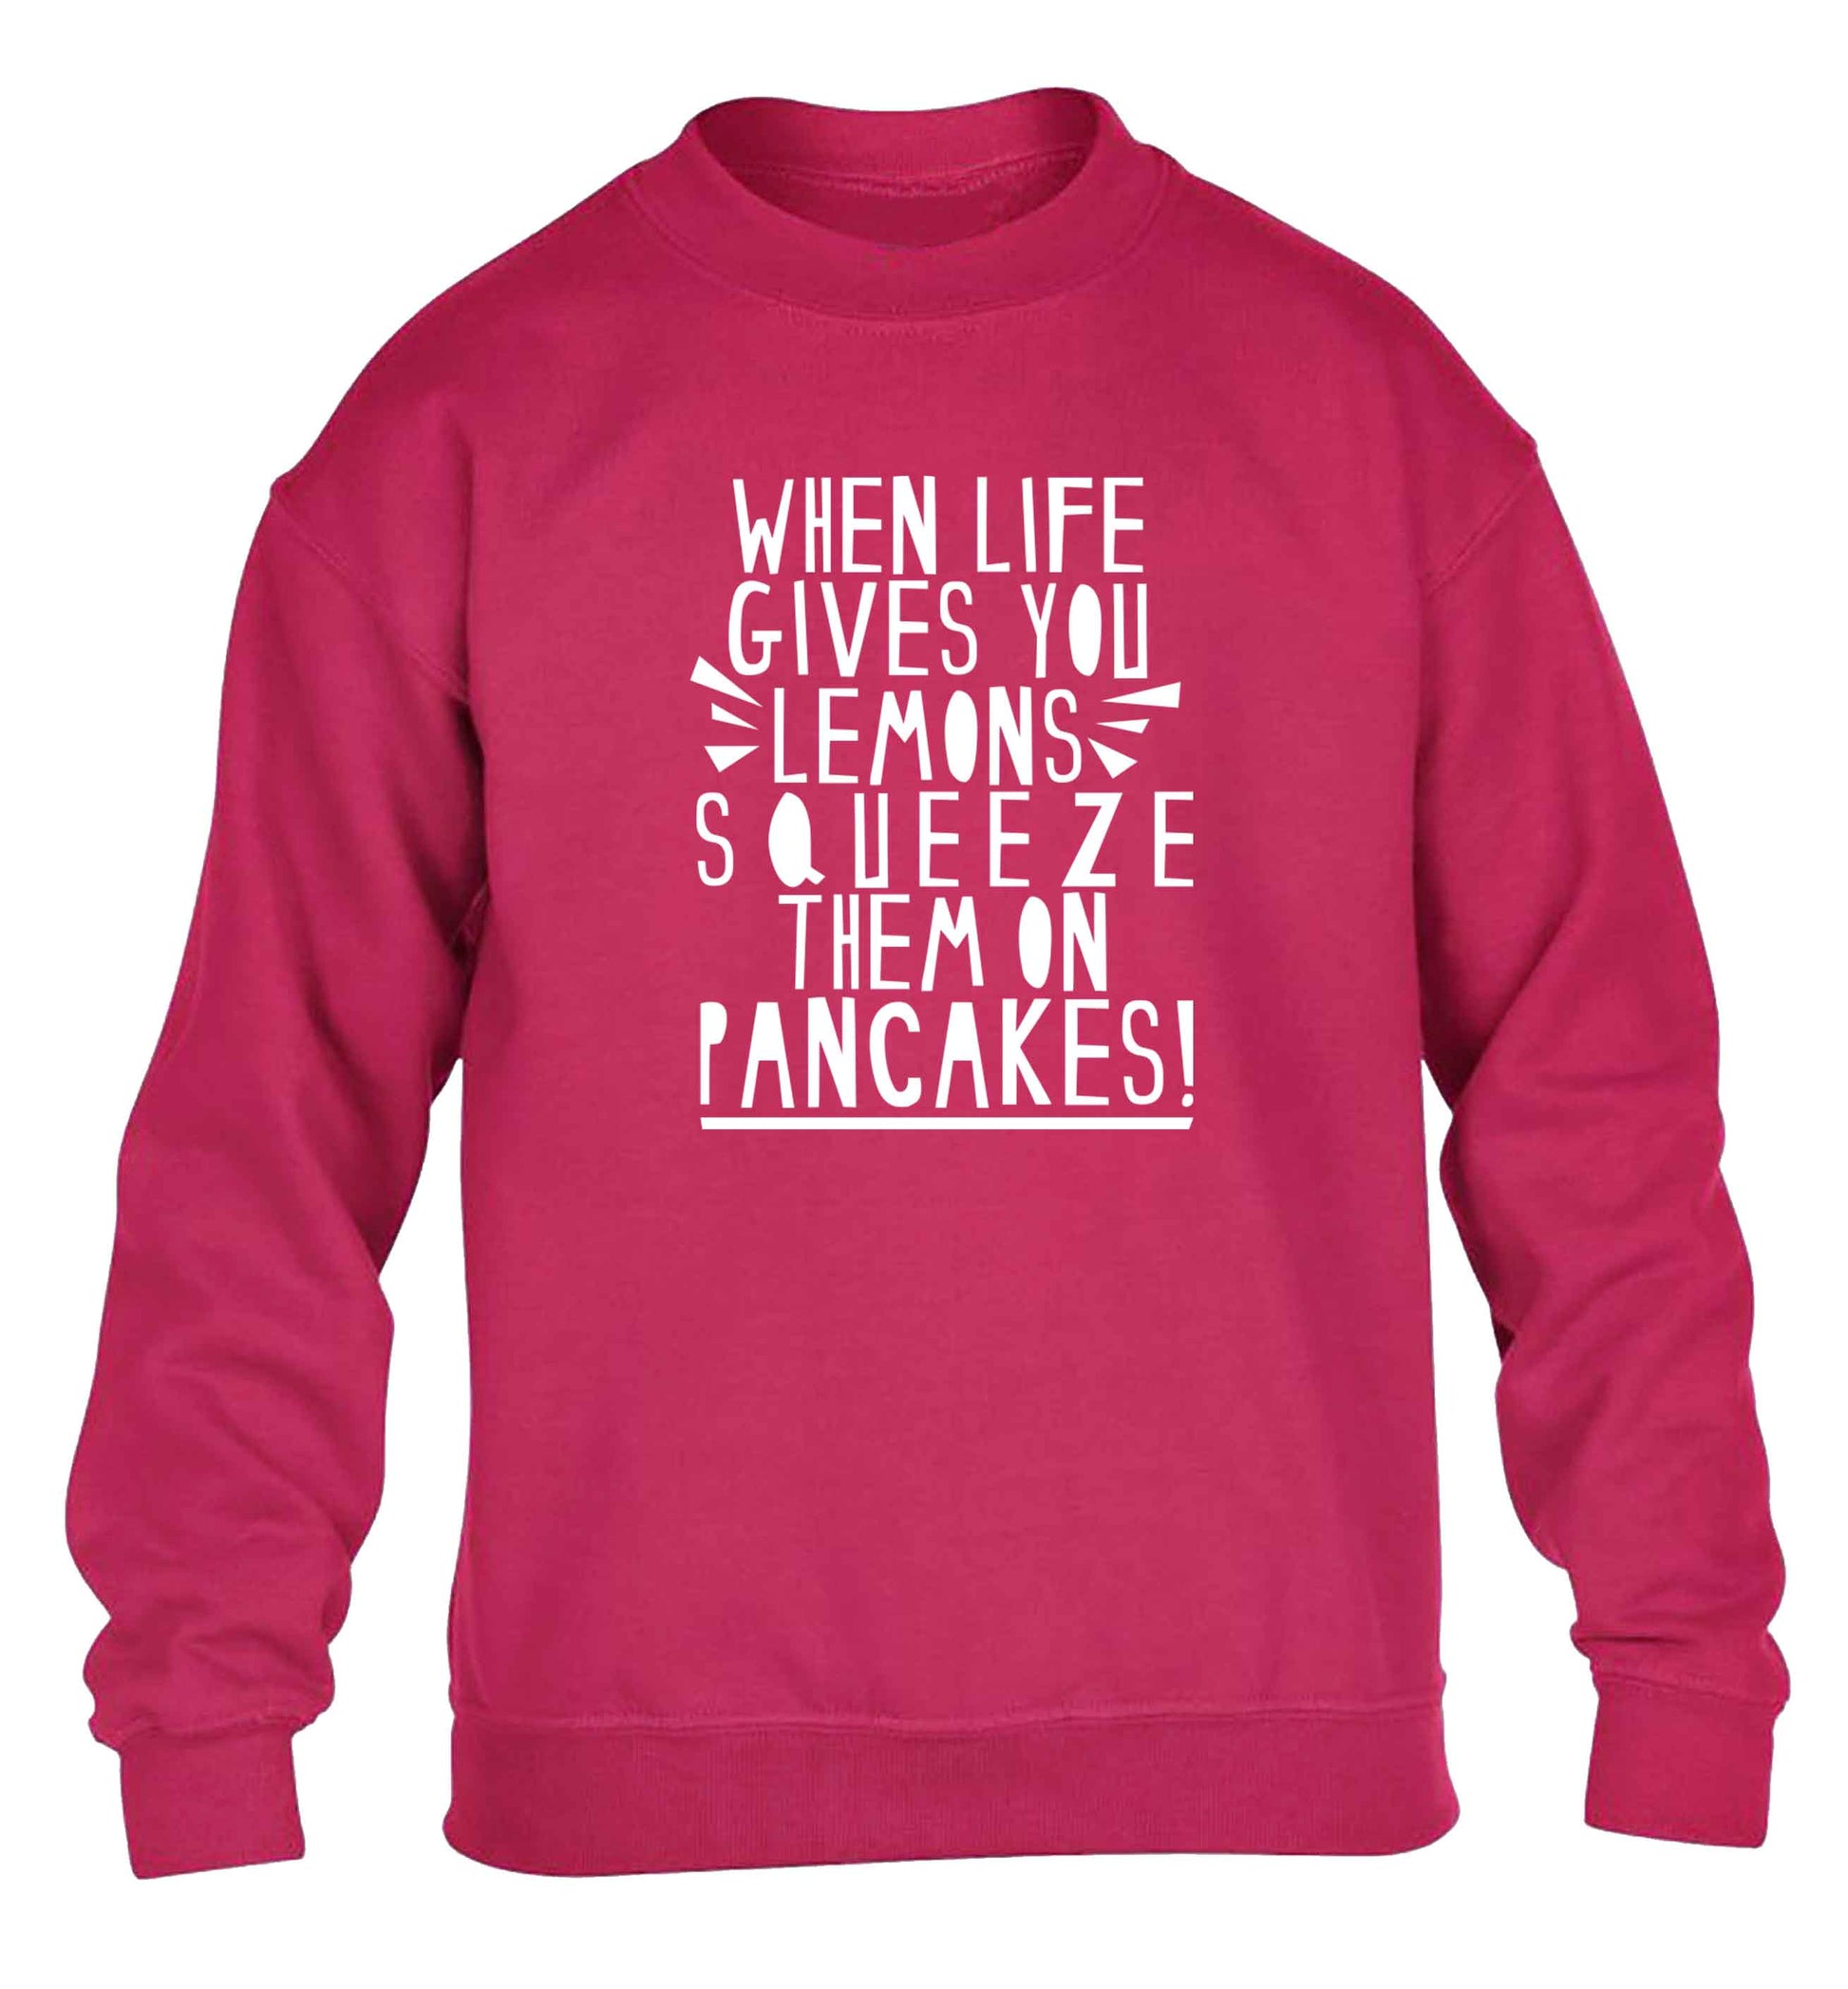 When life gives you lemons squeeze them on pancakes! children's pink sweater 12-13 Years